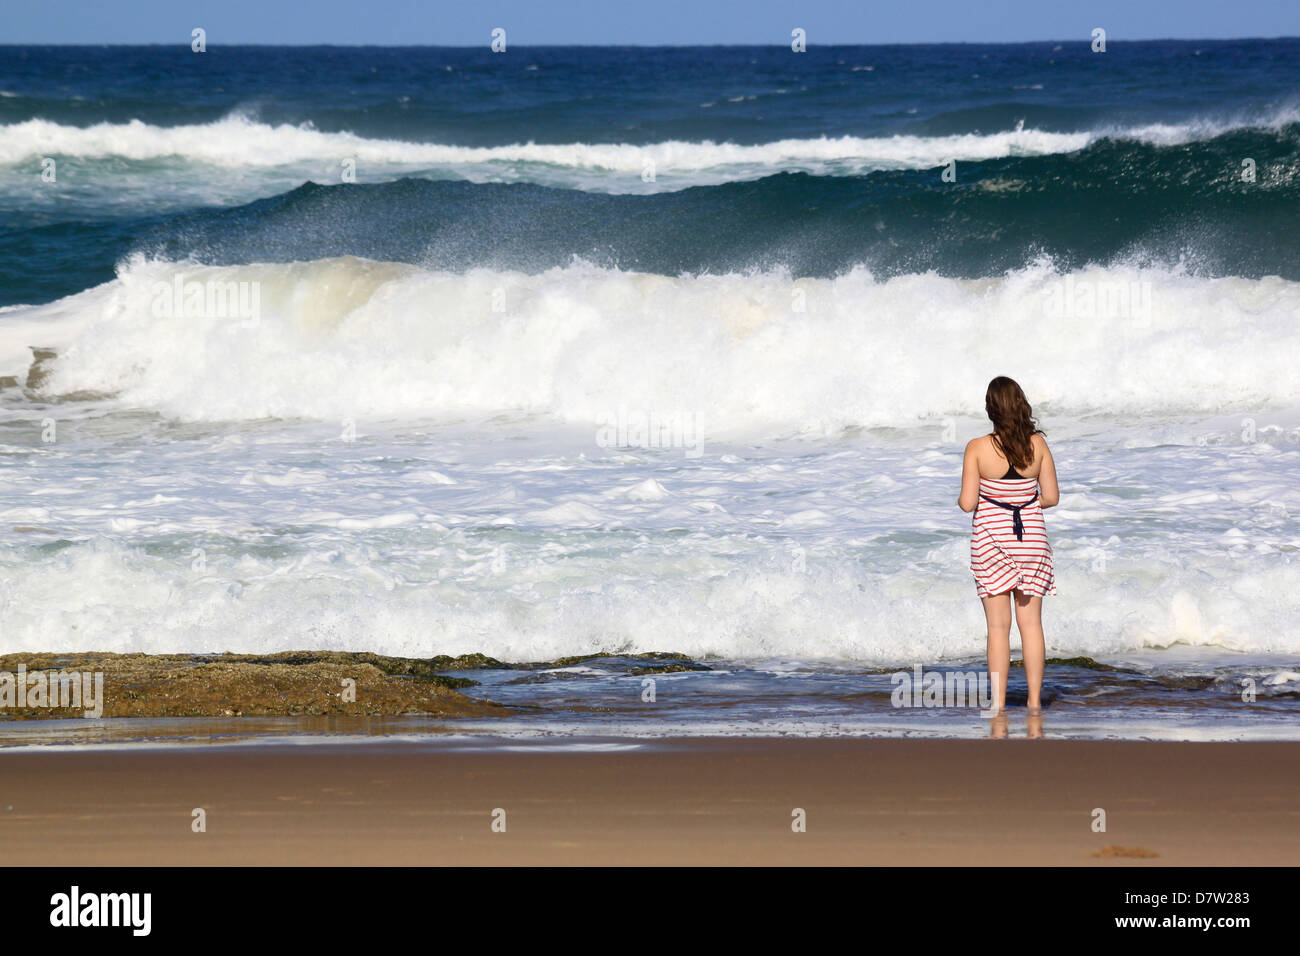 A young woman stands by crashing waves at the beach, St. Lucia Wetlands, Kwa-Zulu Natal, South Africa Stock Photo